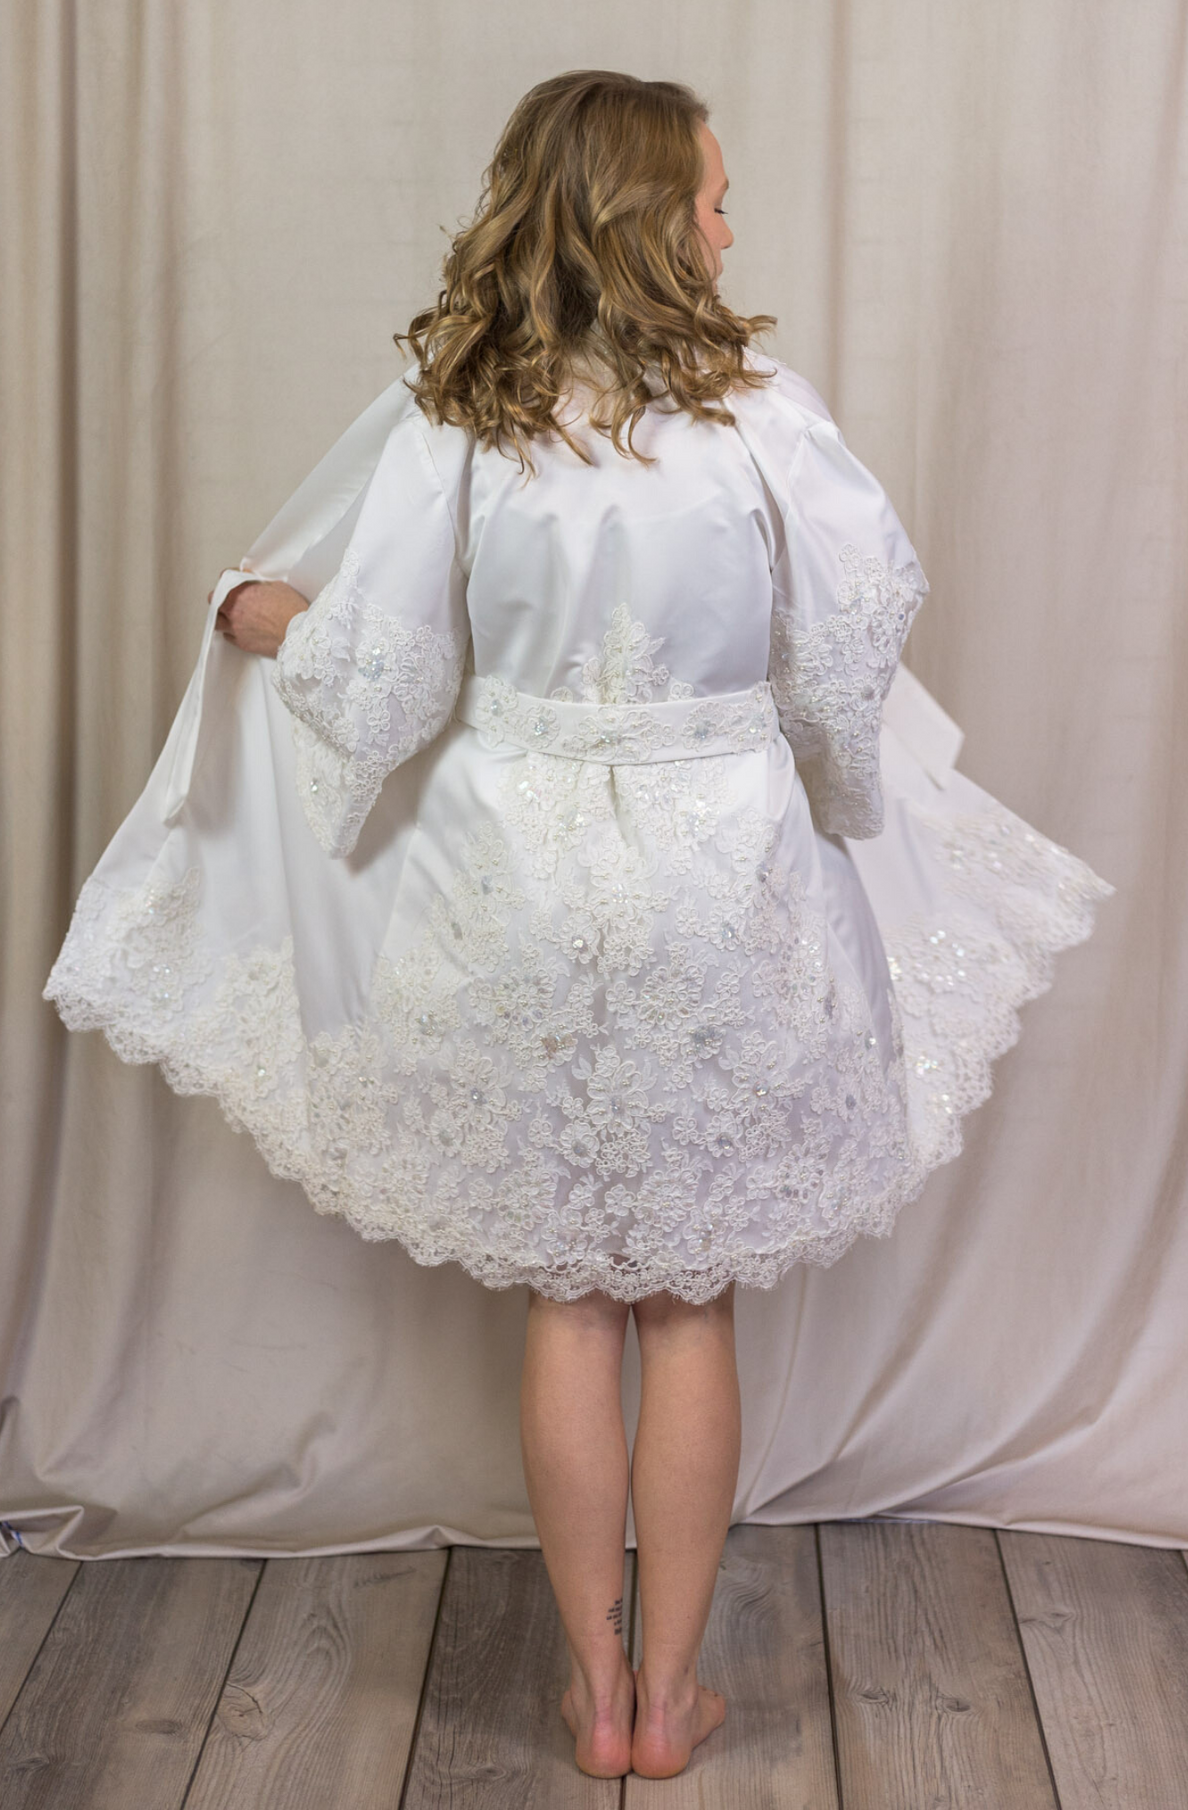 Mother Daughter Matching Dress, off White Dress, Lace Christening Gown,  Baptism Dress, Mommy and Me Dress, Tutu Dress,special Occasion Dress 